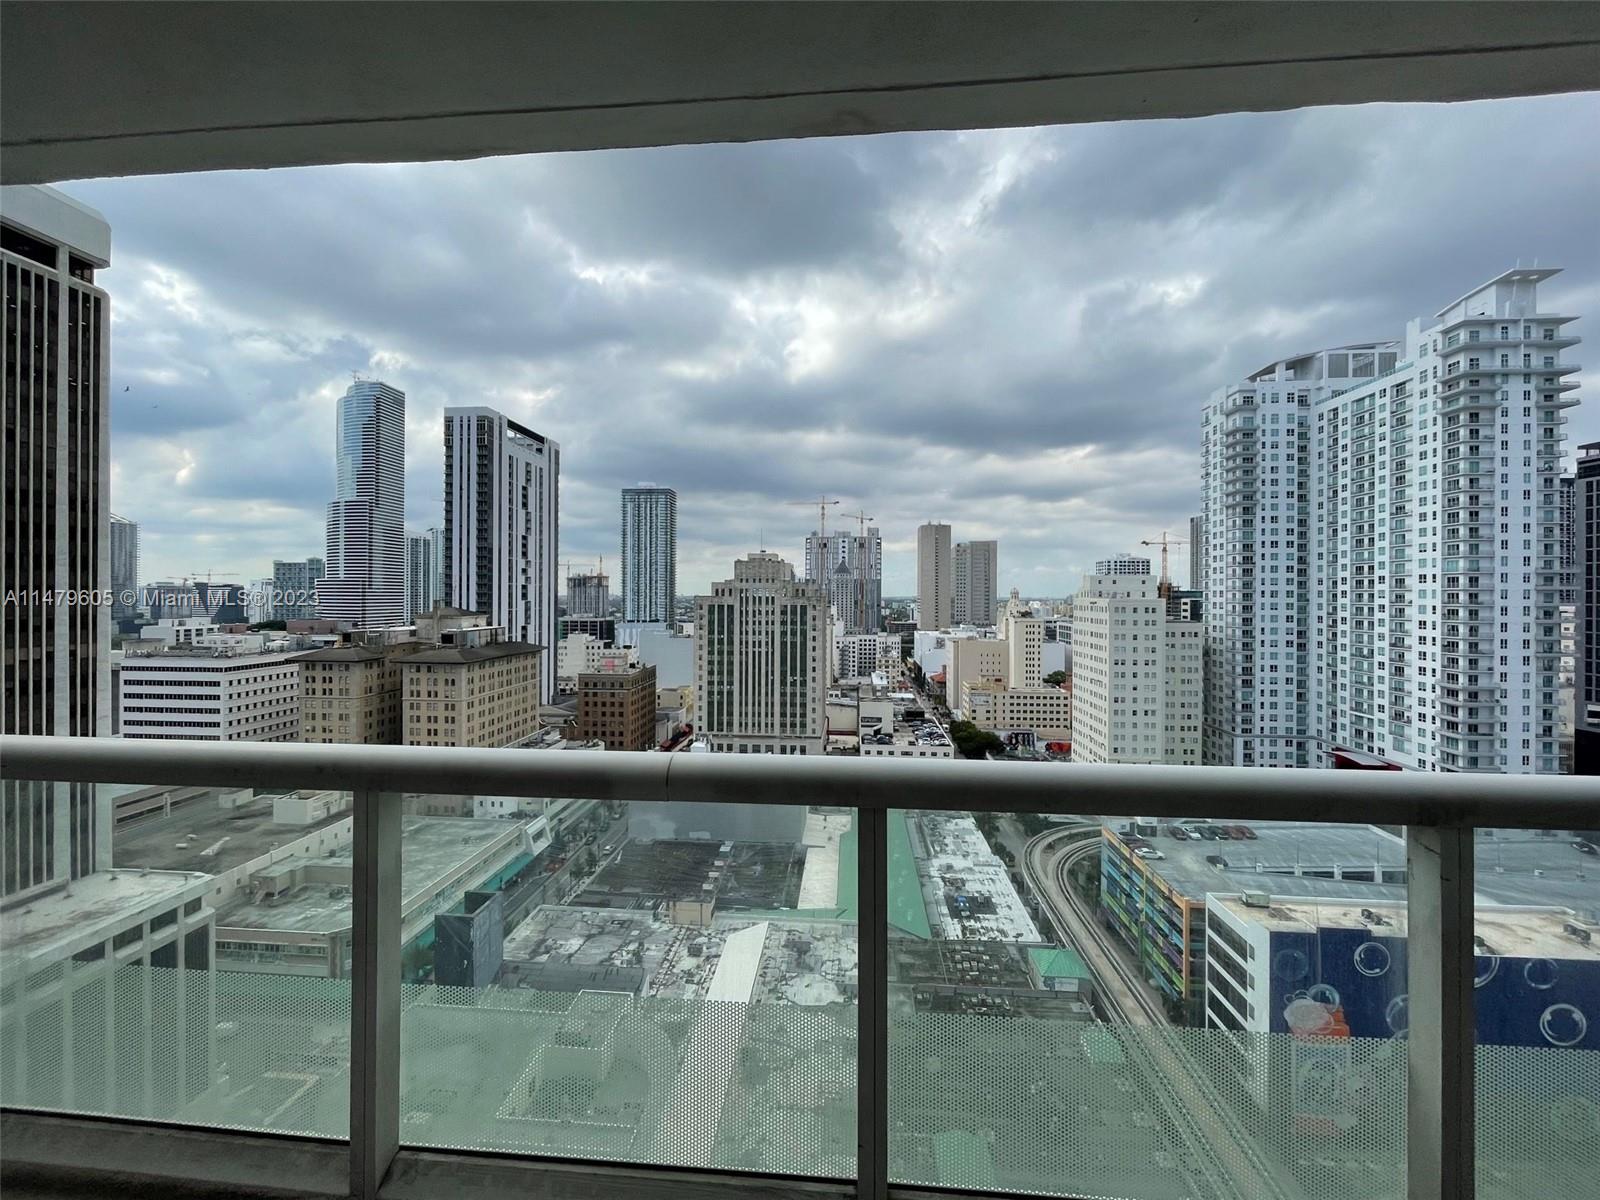 Very Spacious 1 bedroom + den apartment with city views in Downtown Miami. Washer & Dryer in unit. Building amenities includes large fitness center and oversized pool deck, among others. Very centrally located for a real urban life experience.